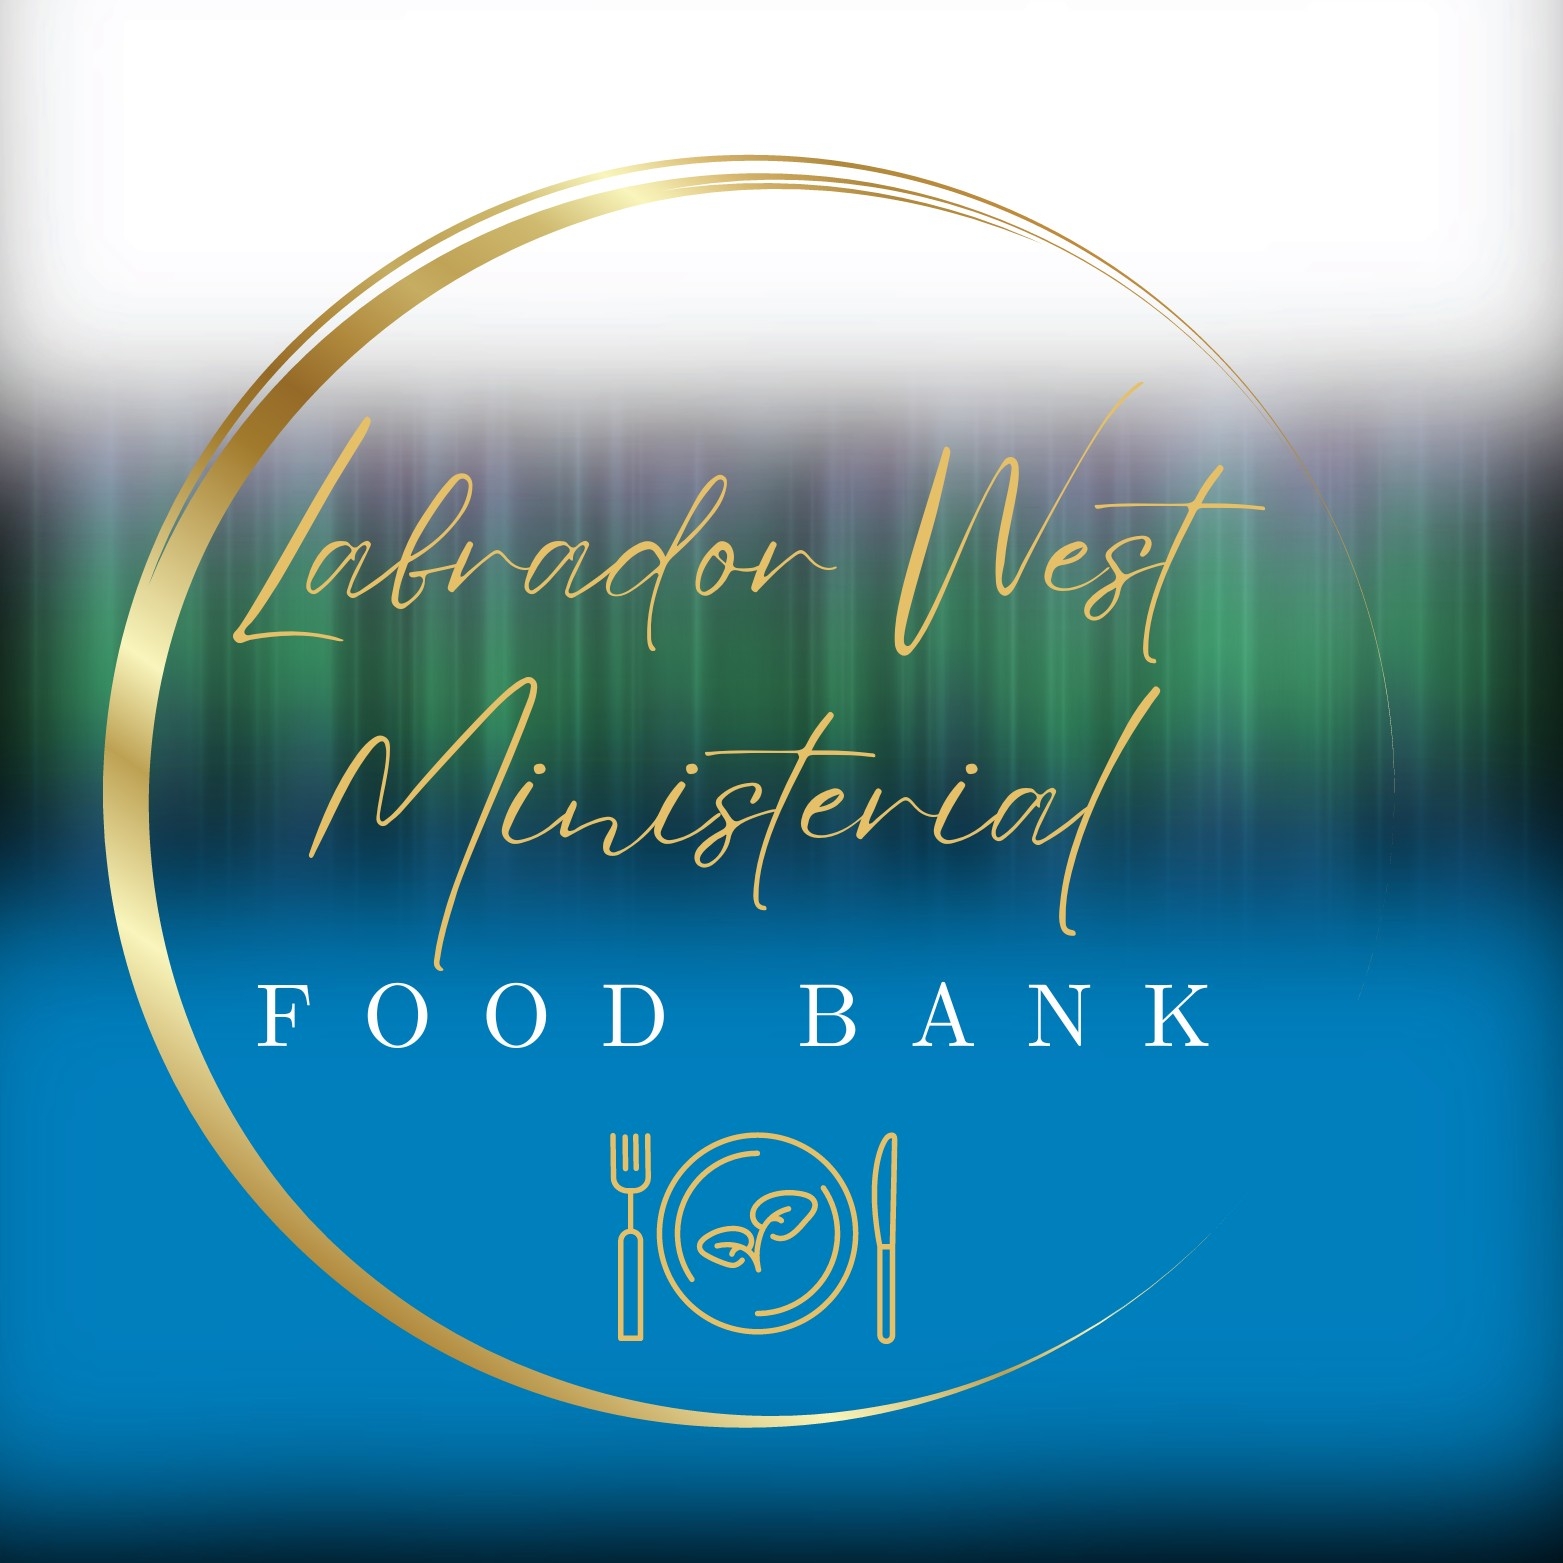 Labrador West Ministerial Food Bank